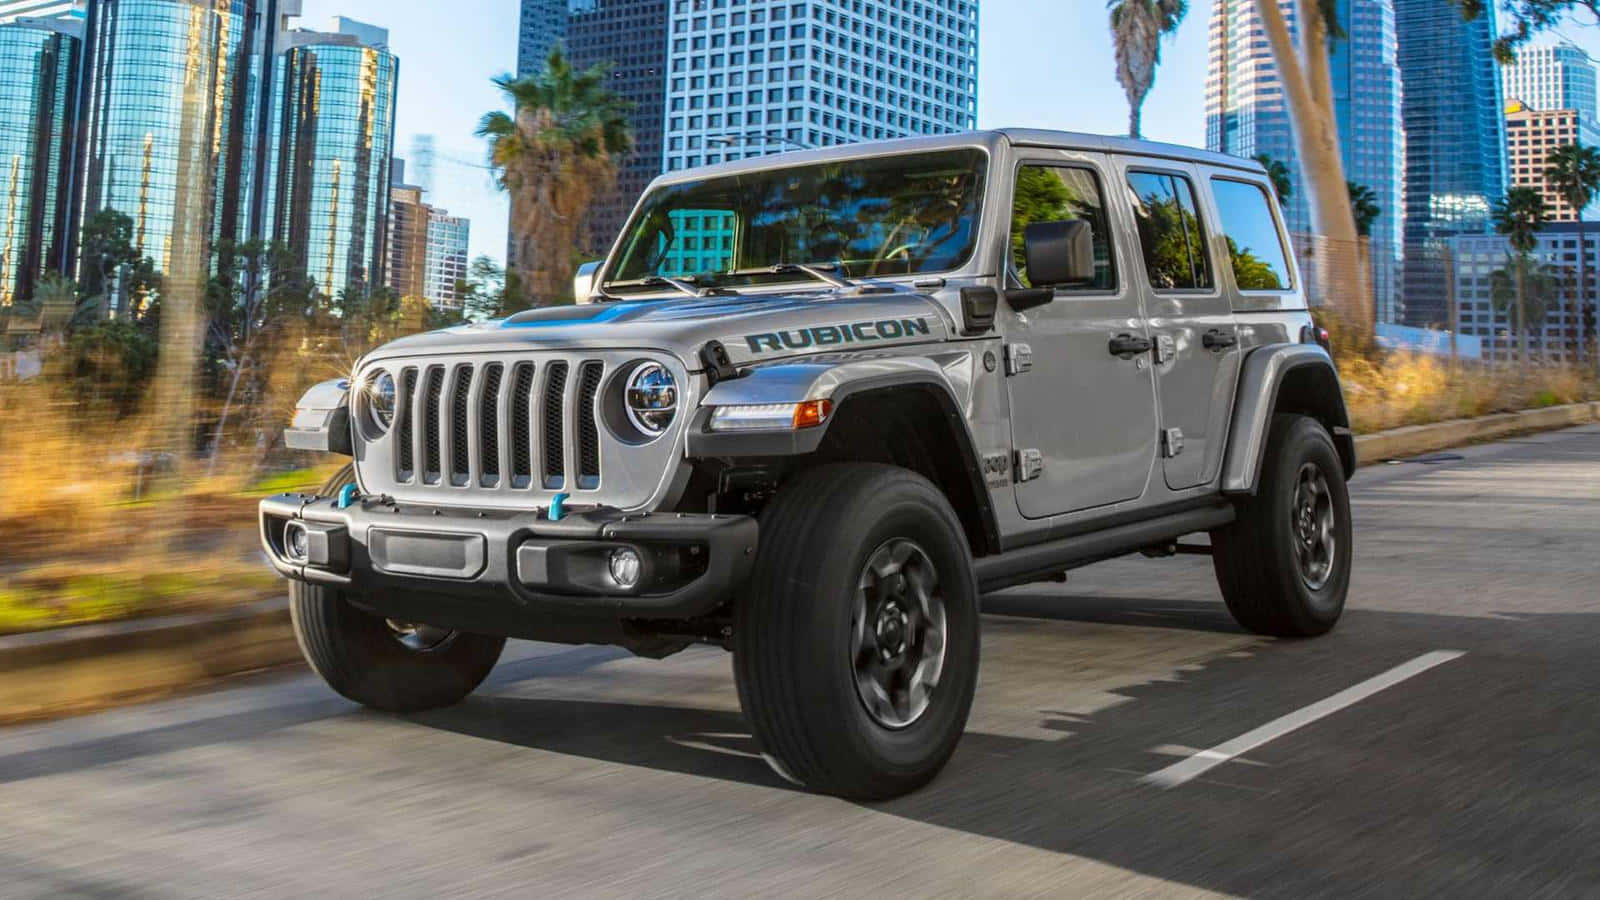 The 2020 Jeep Wrangler Is Driving Down A City Street